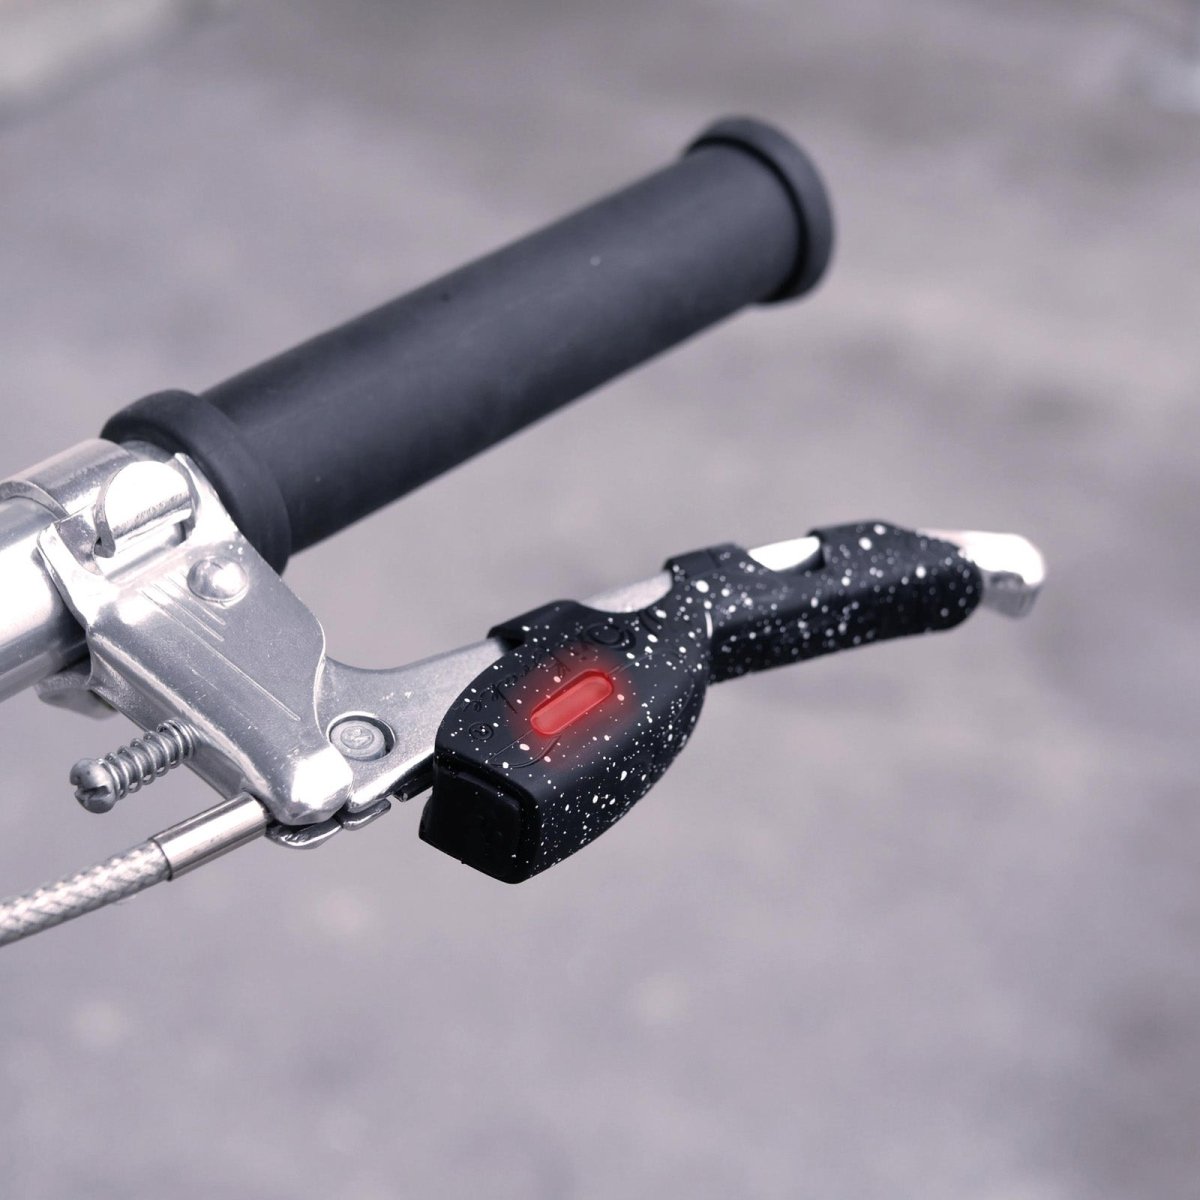 OxiTurn. Powerful bicycle light with left right turn signal function